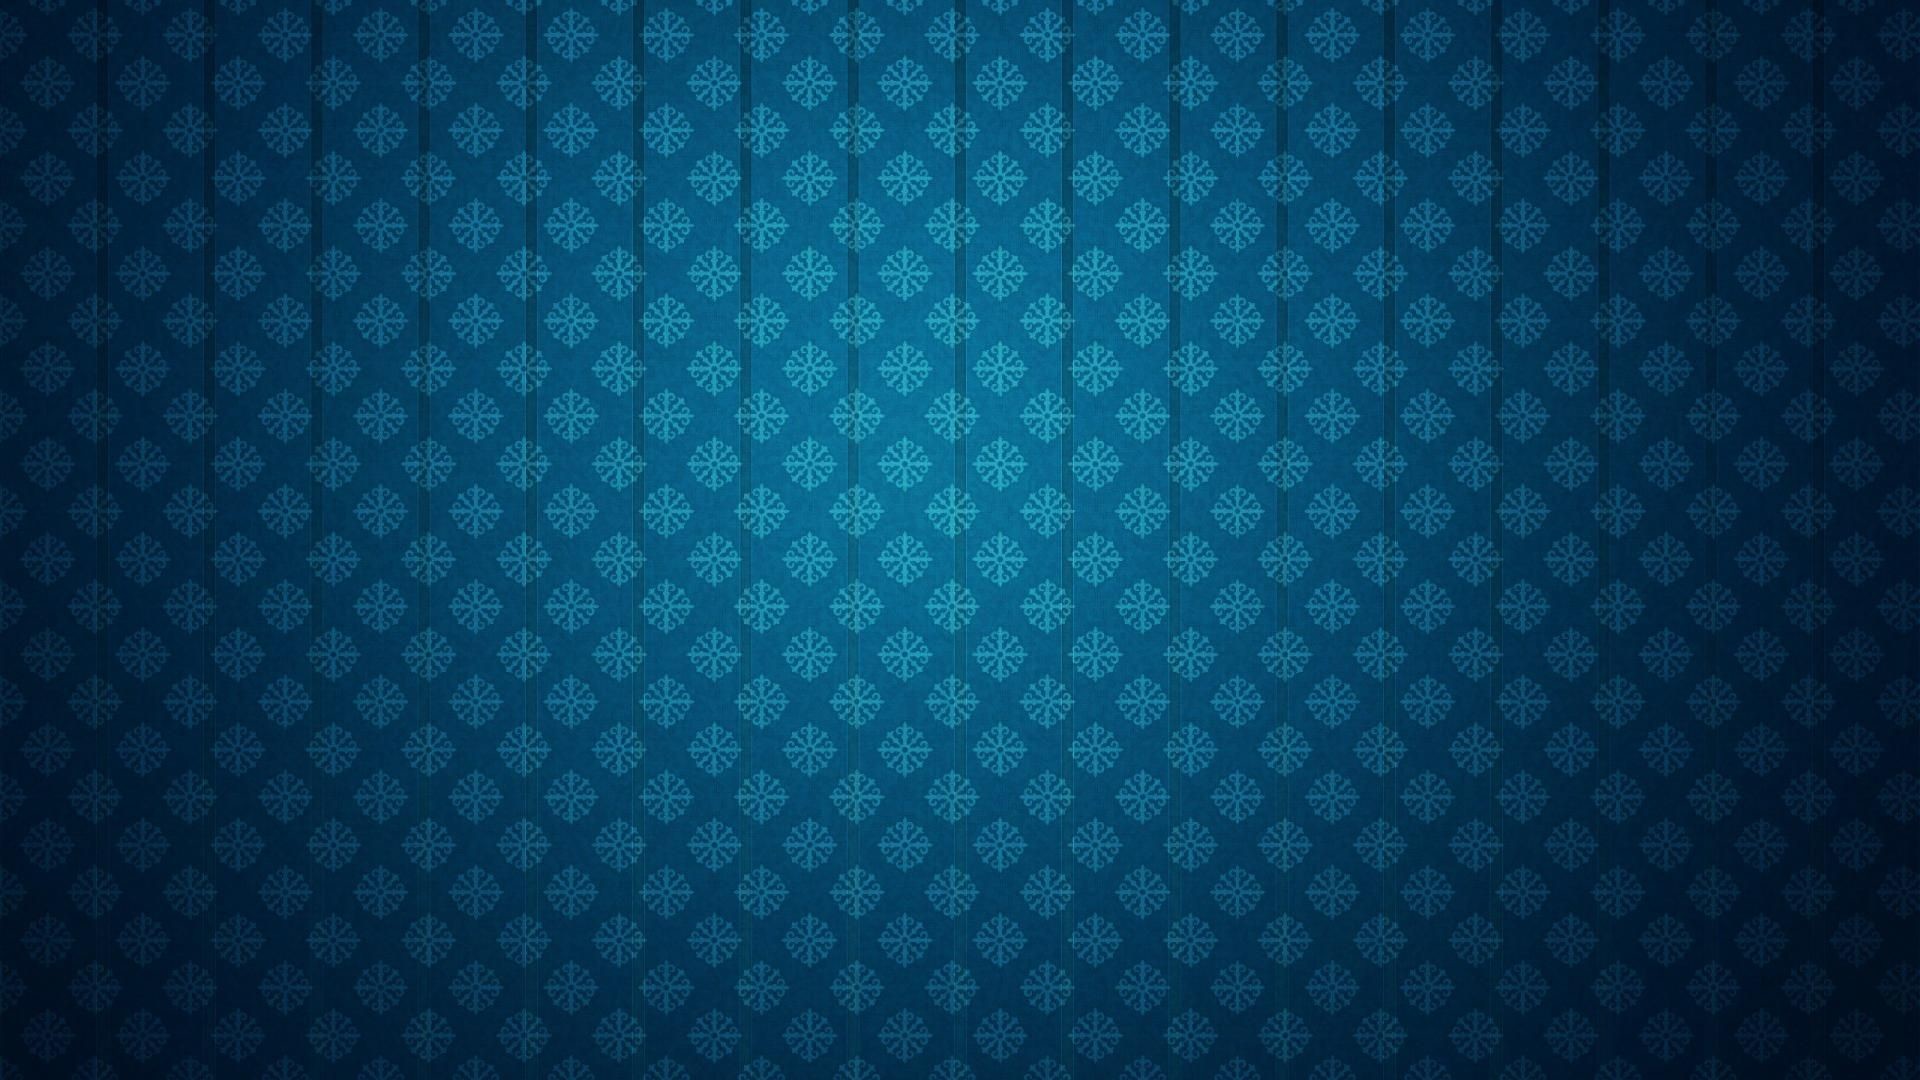 1920x1080 Blue Background Hd Designs  abstract beautiful Blue design  backgrounds wide wallpapers:1280x800,1440x900